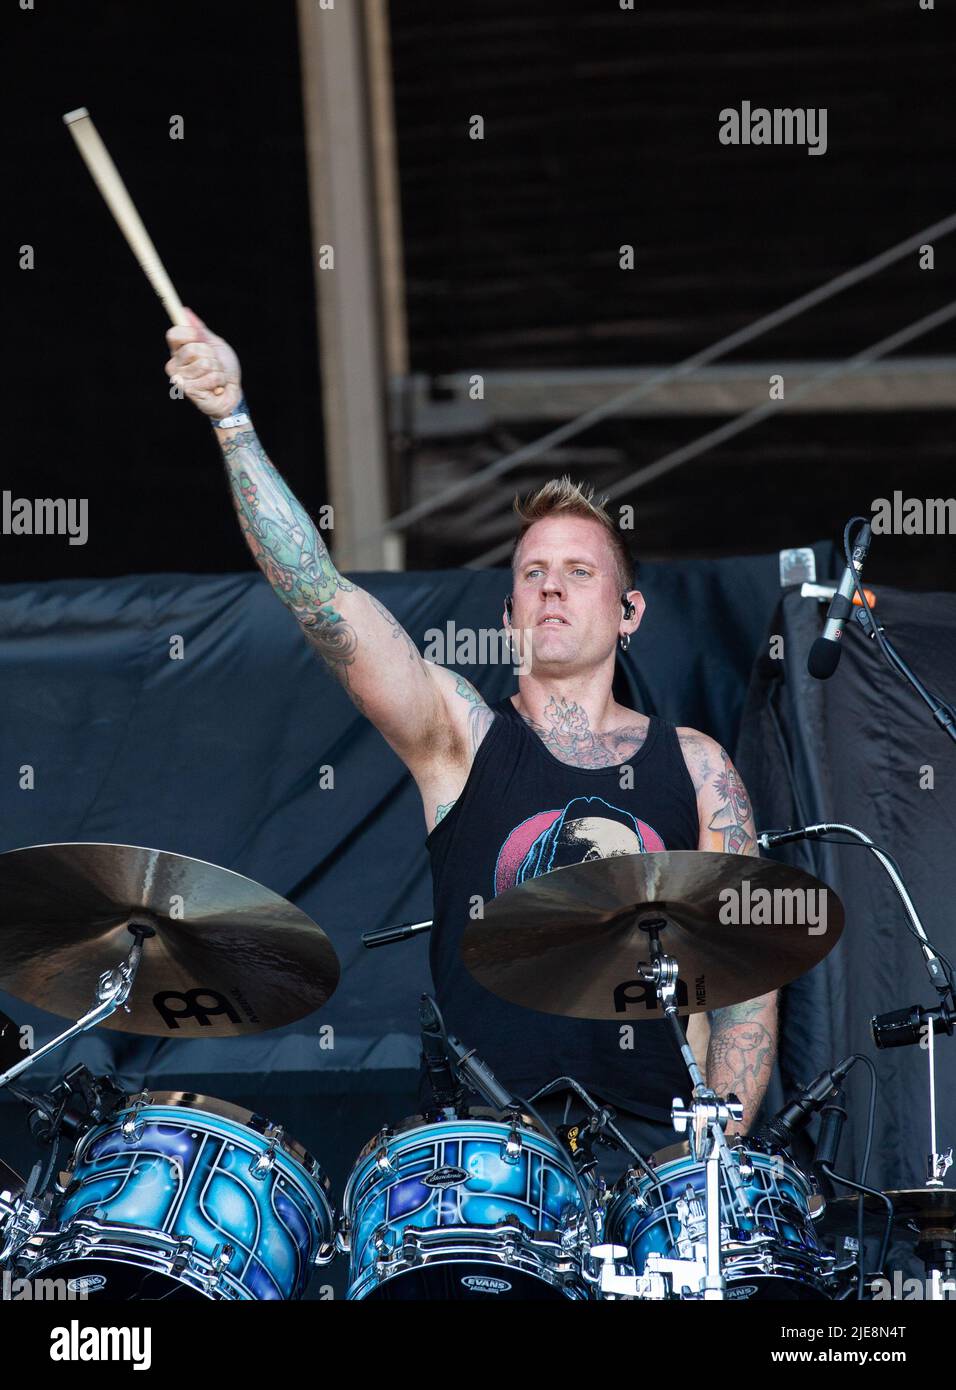 Oslo, Norway. 23rd, June 2022. The American metal band Mastodon performs a live concert during the Norwegian music festival Tons of Rock 2022 in Oslo. Here drummer Brann Dailor is seen live on stage. (Photo credit: Gonzales Photo - Per-Otto Oppi). Stock Photo